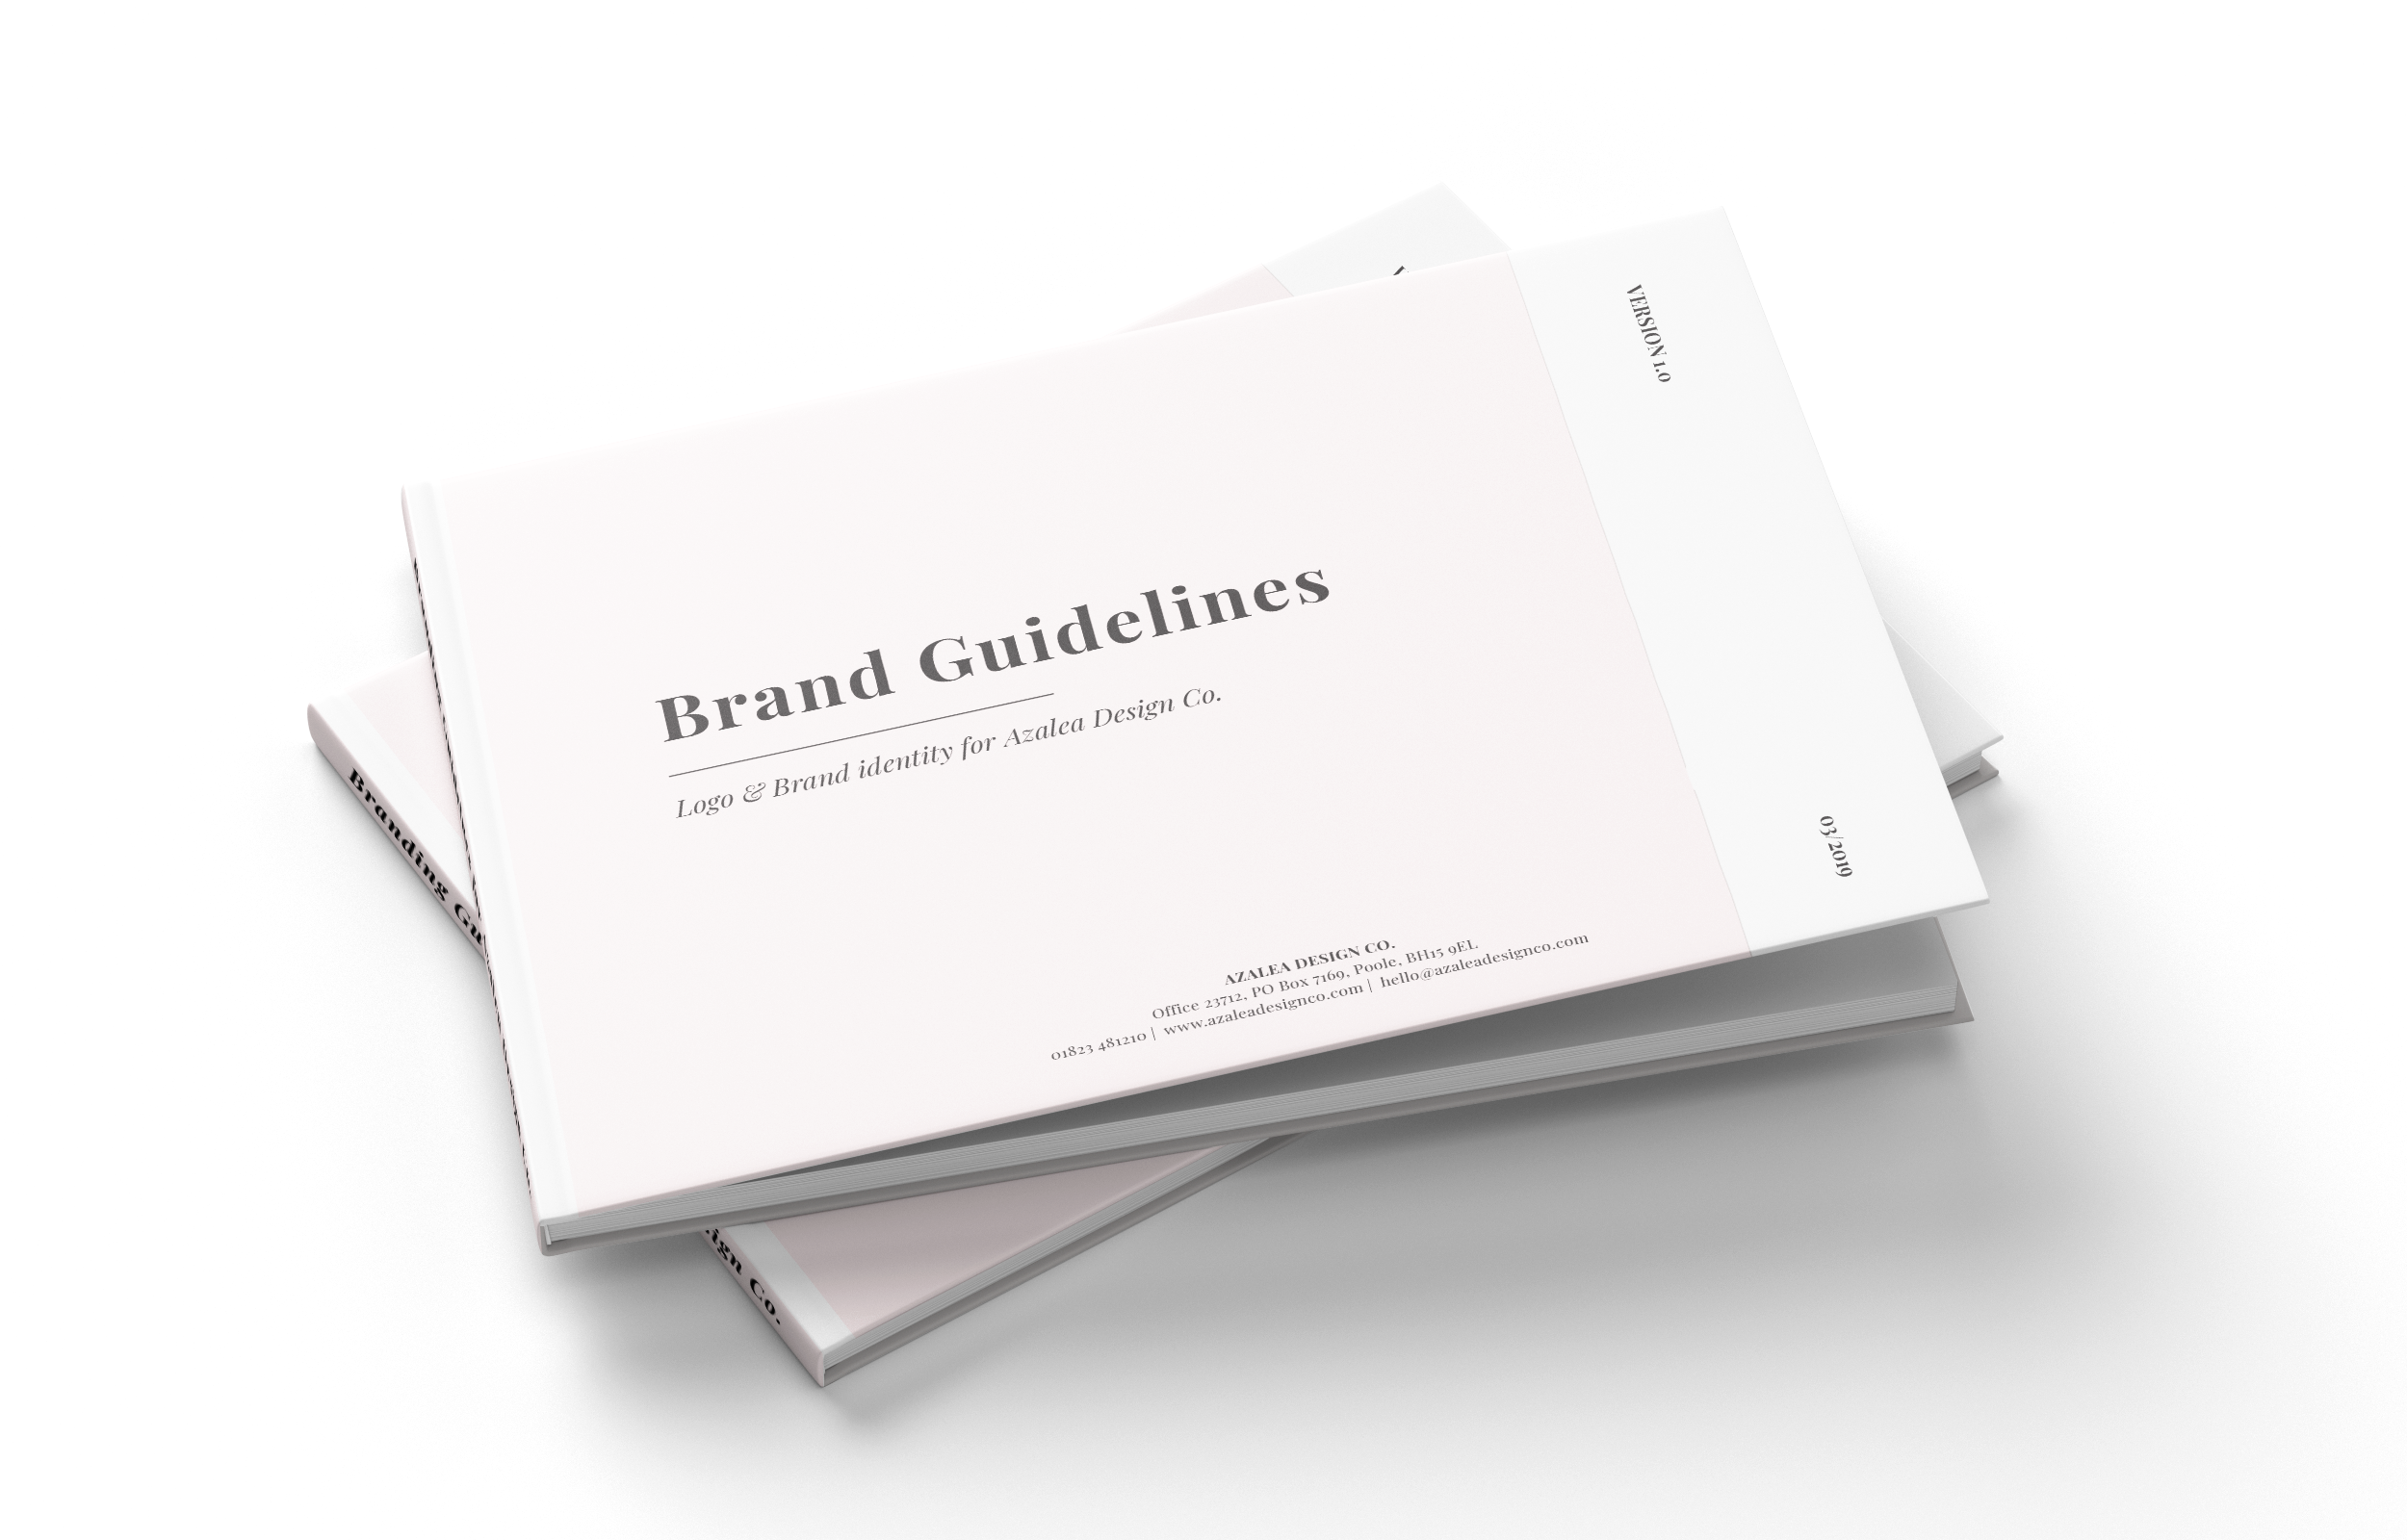 Brand Guidelines Cover. Two books piled on top of one another